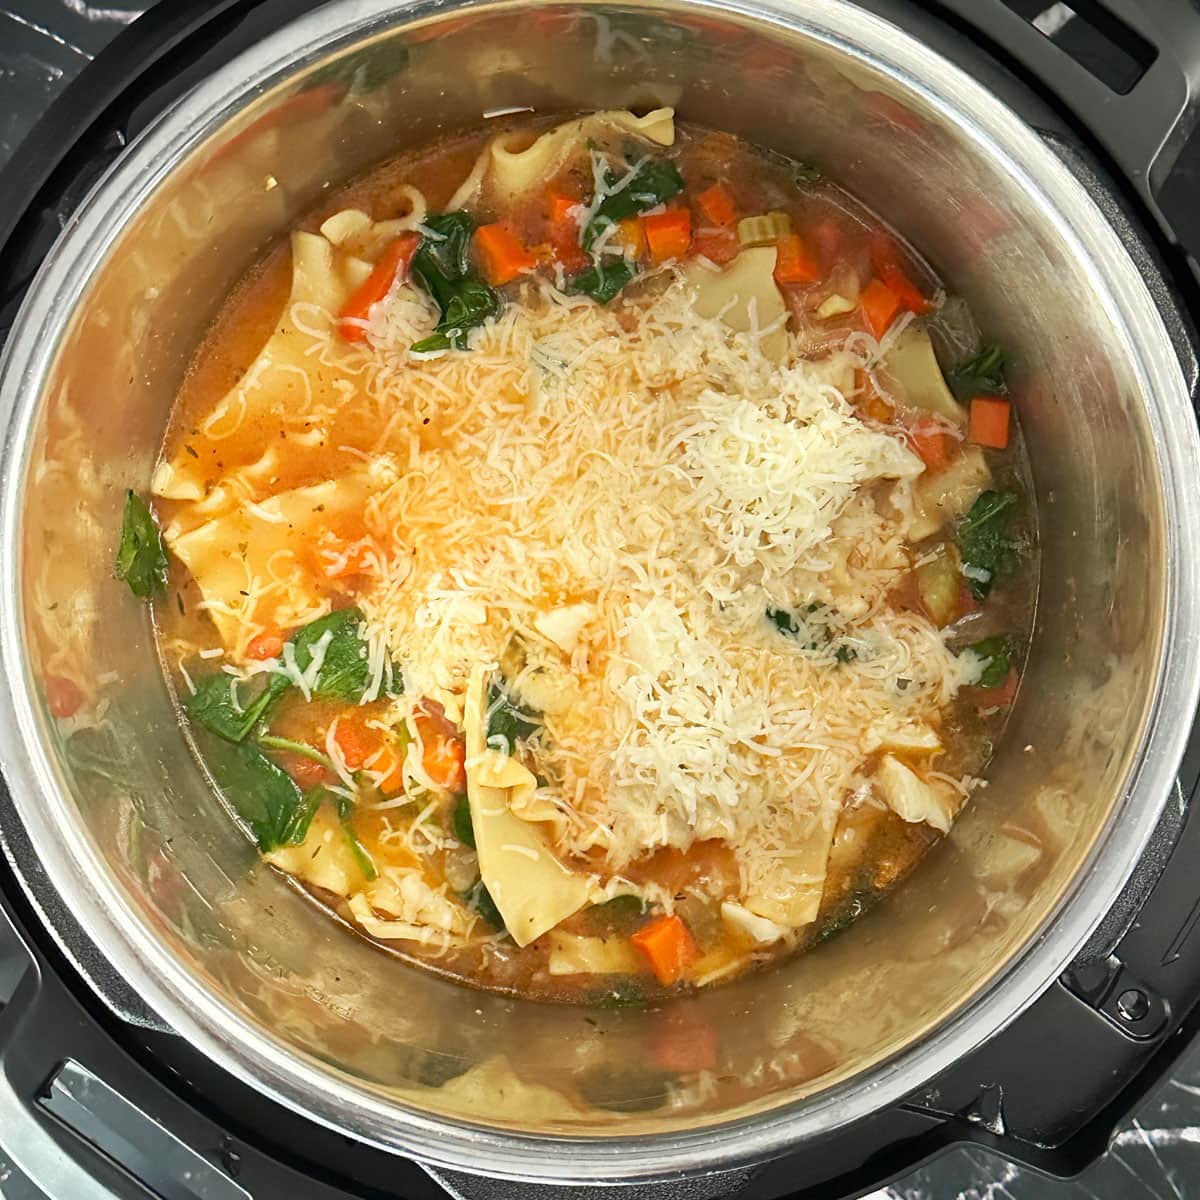 Cheese and spinach added to cooked Lasagna soup.